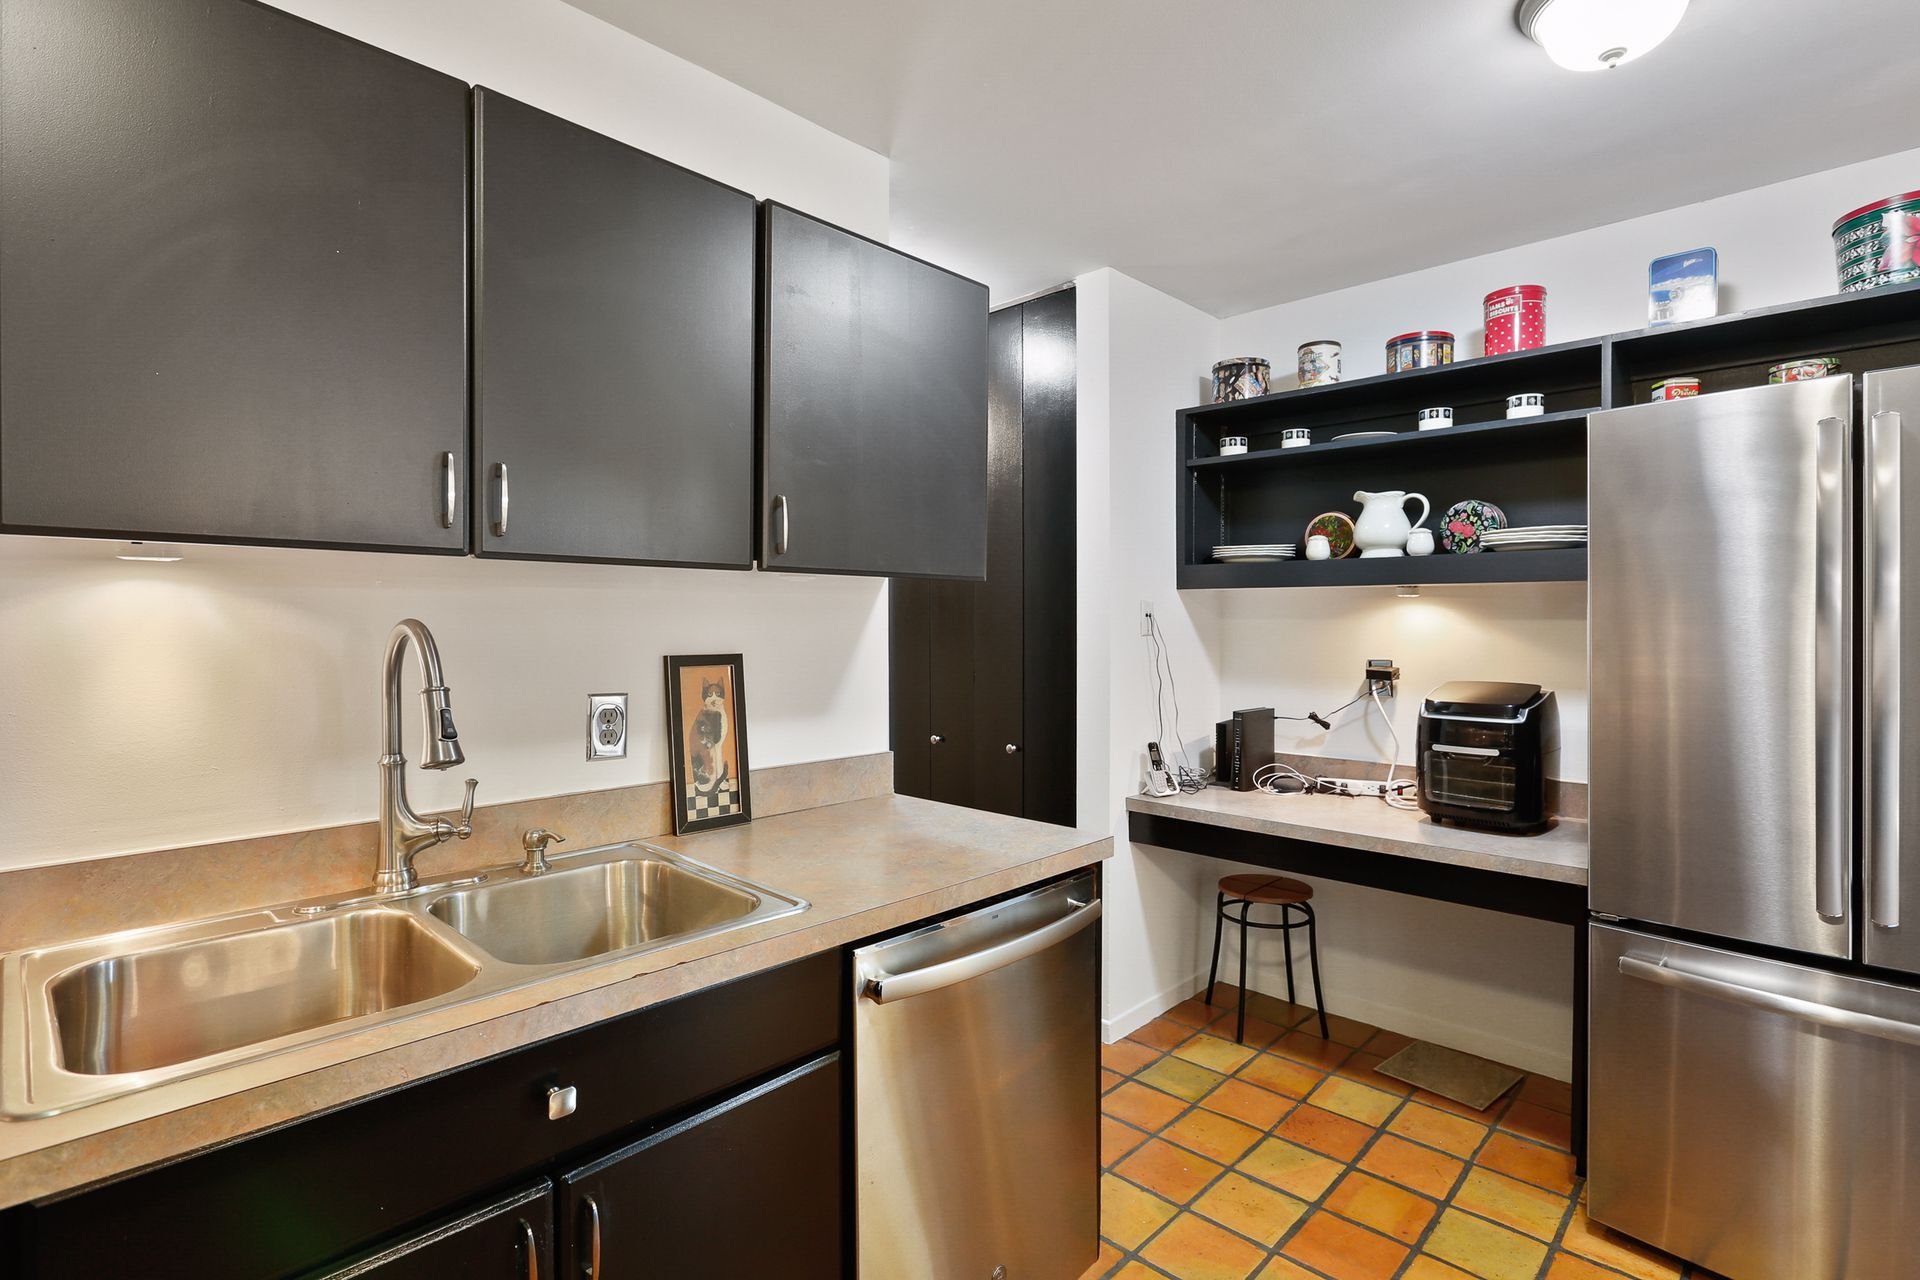 12. Kitchen offers plenty of storage options, prep space, and an eat-in counter.jpg